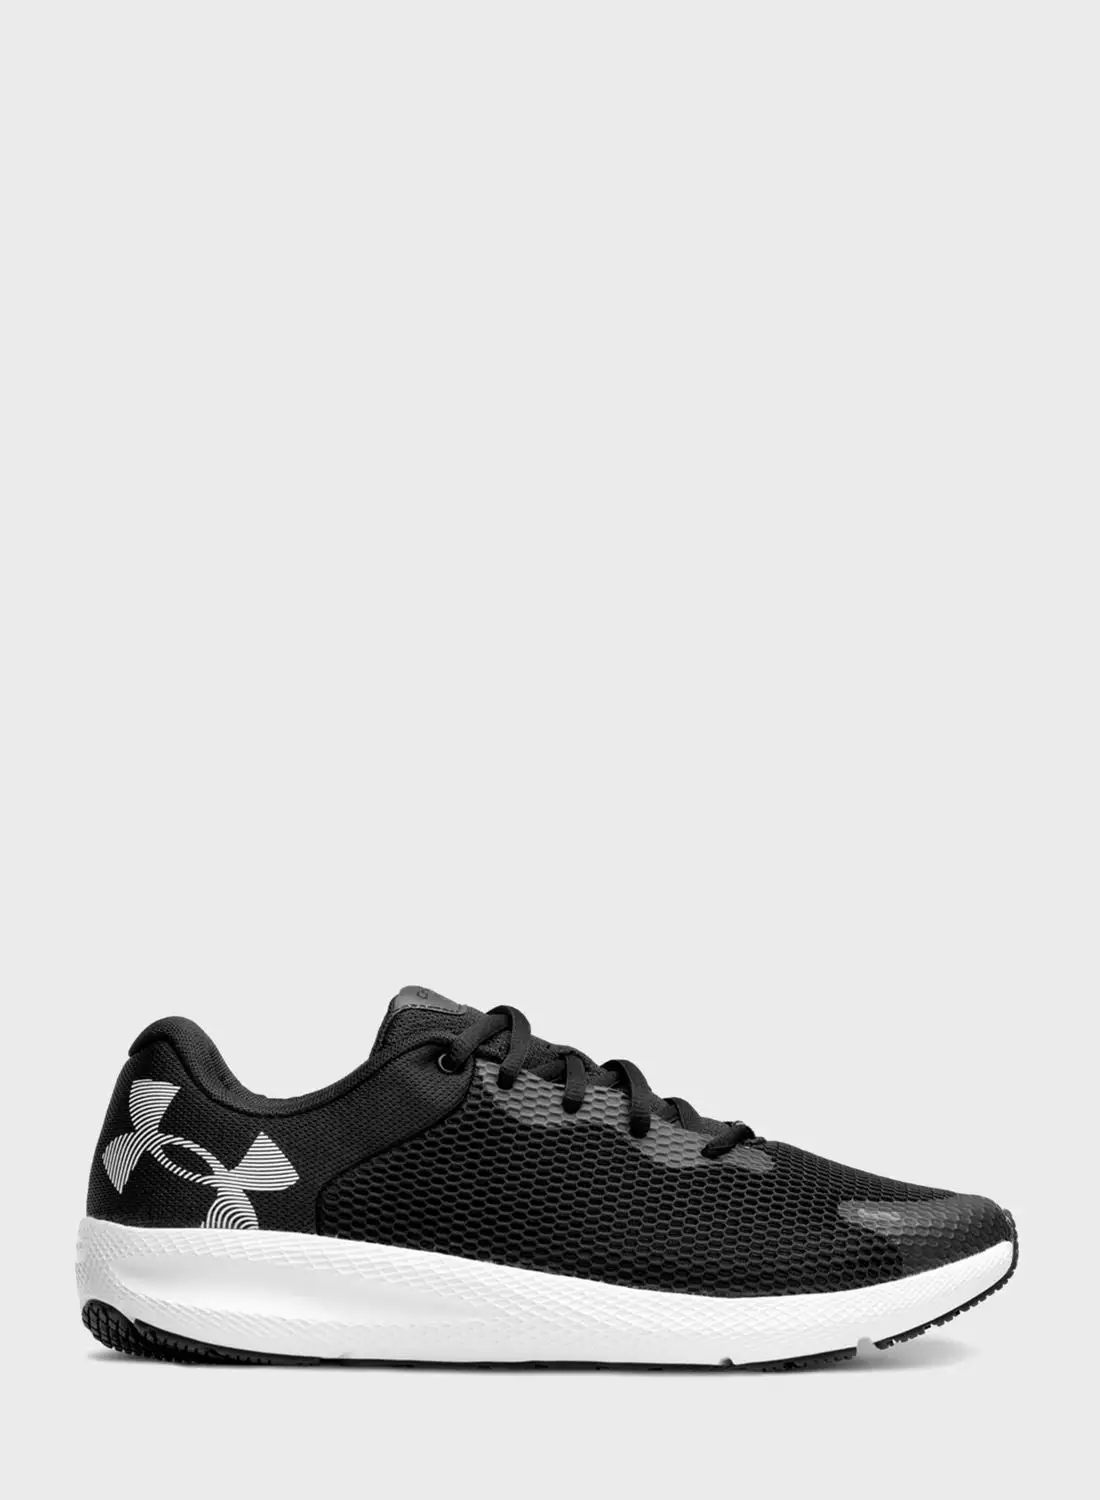 UNDER ARMOUR Charged Pursuit 2 Bl